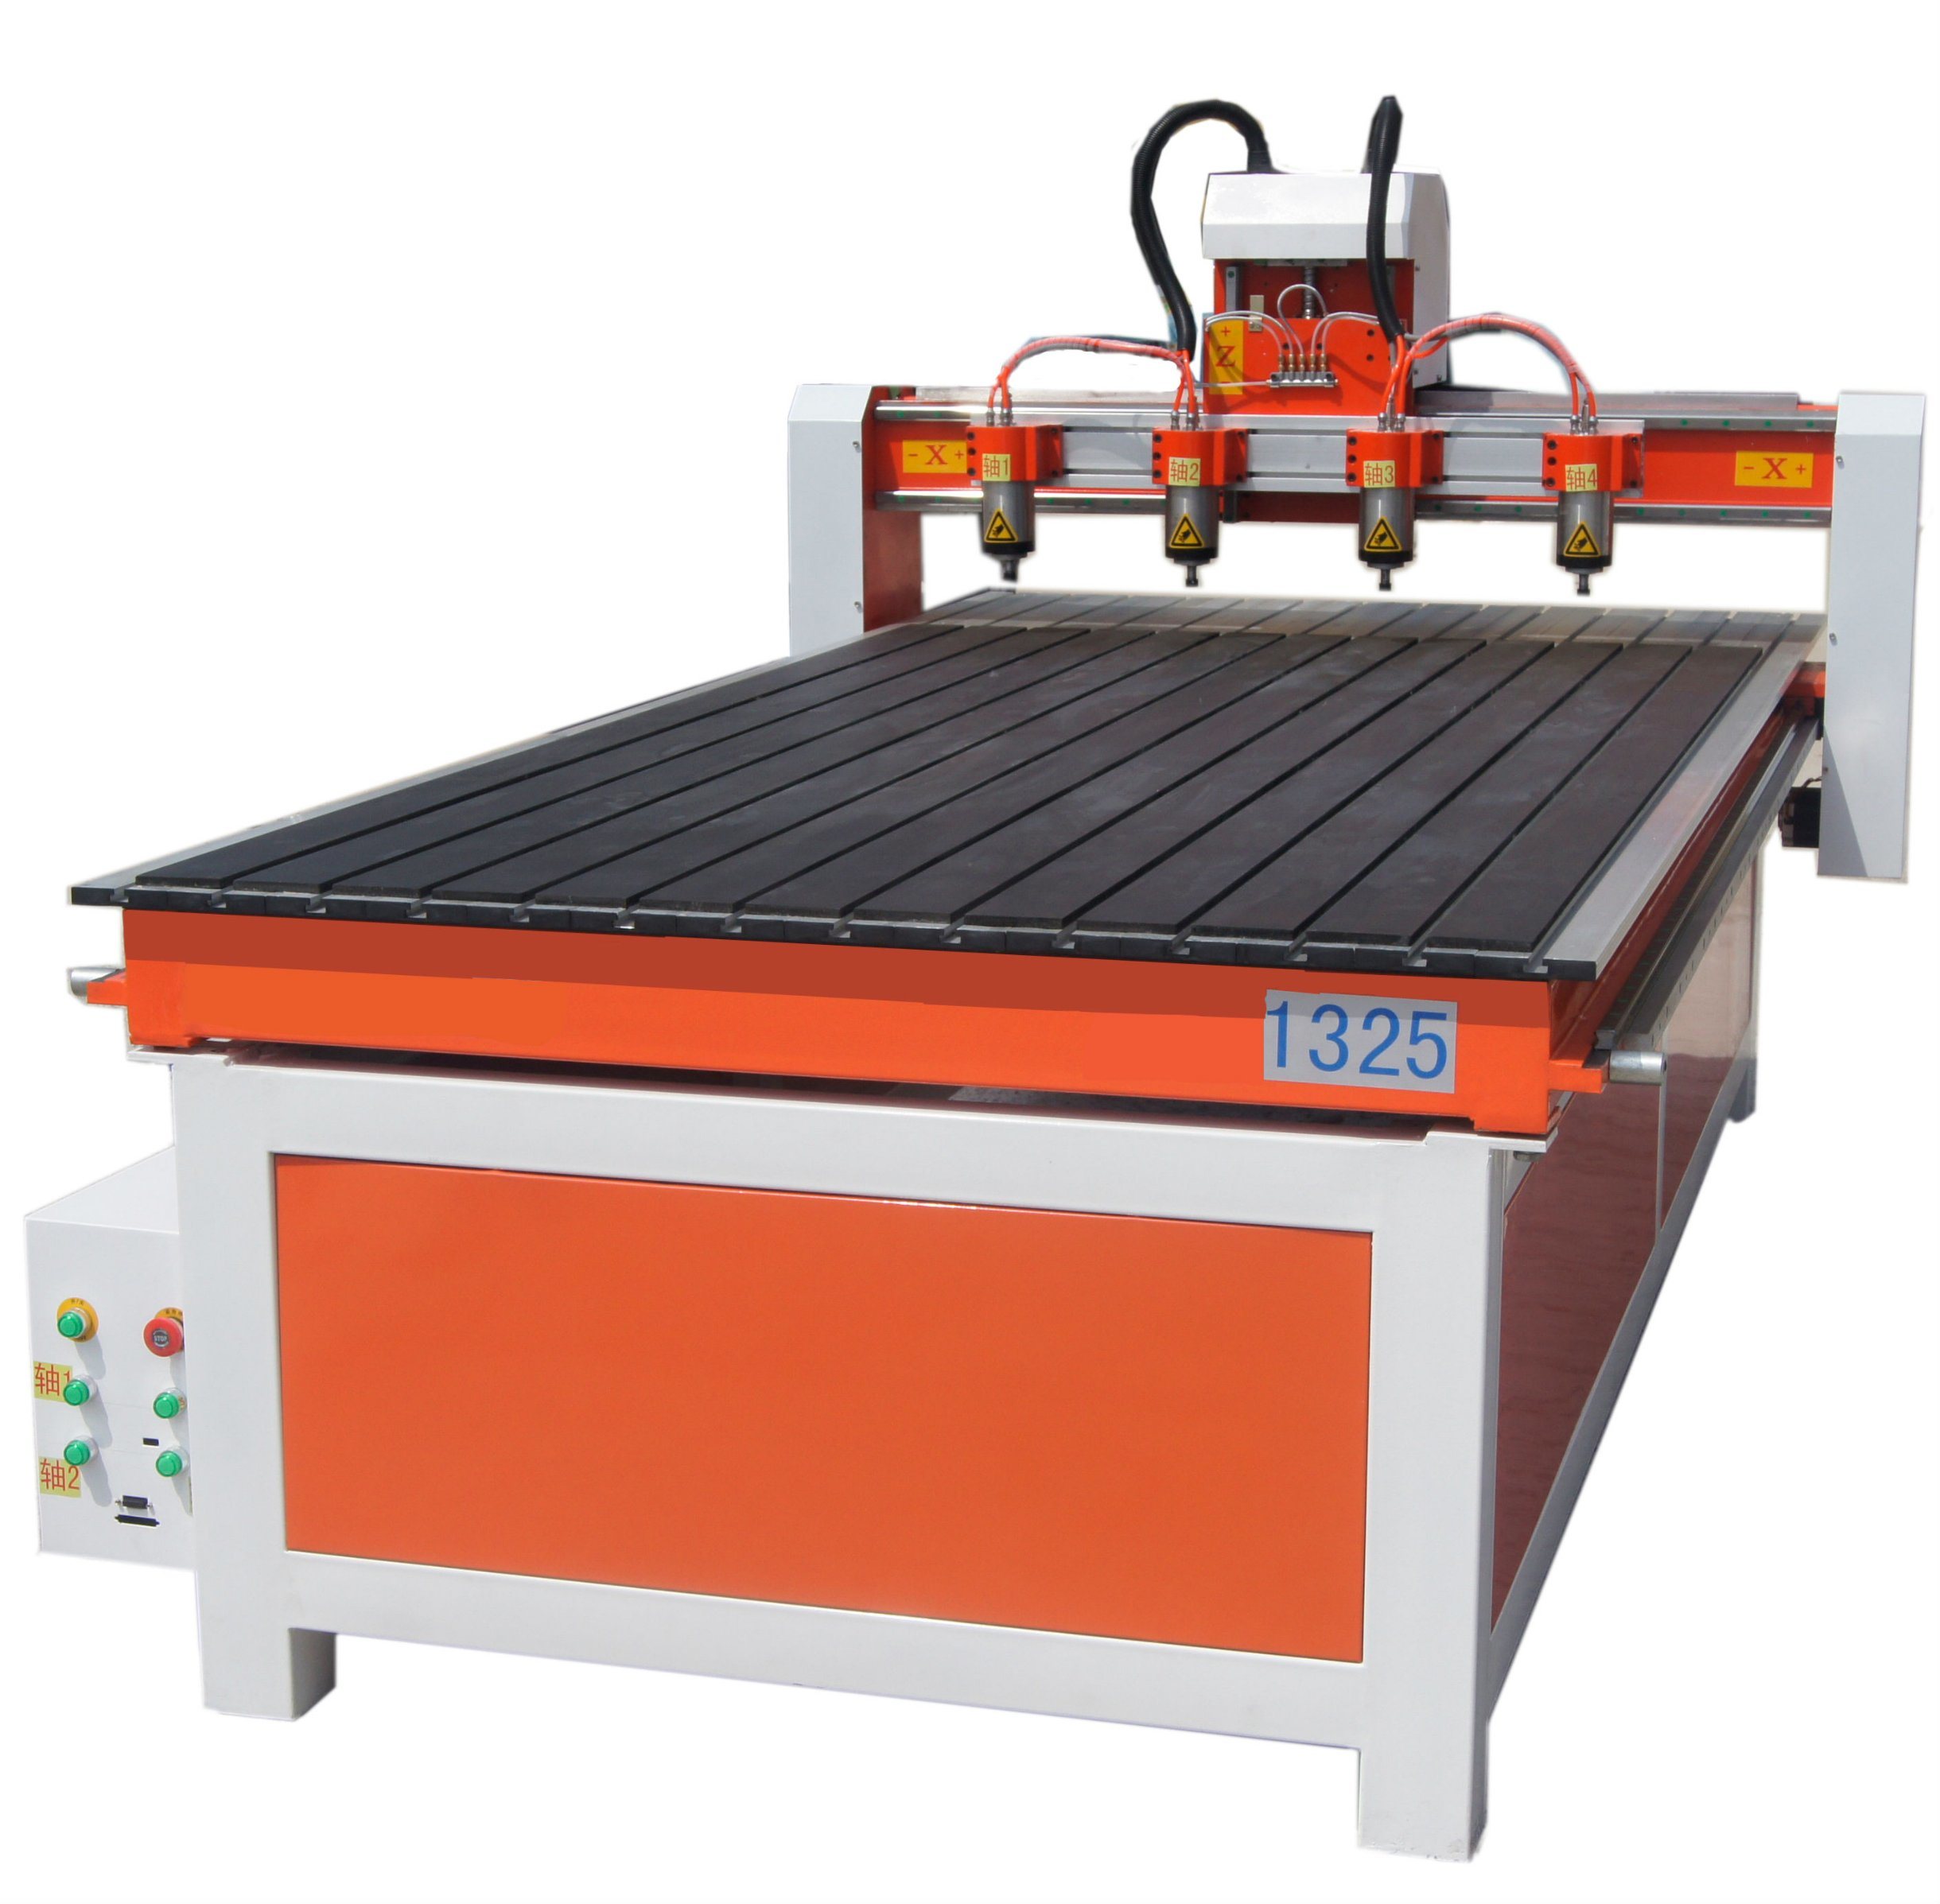 CNC Milling, Carving, Engraving, Drilling, Cutting Machine with Lowest Price and Two Years Warranty